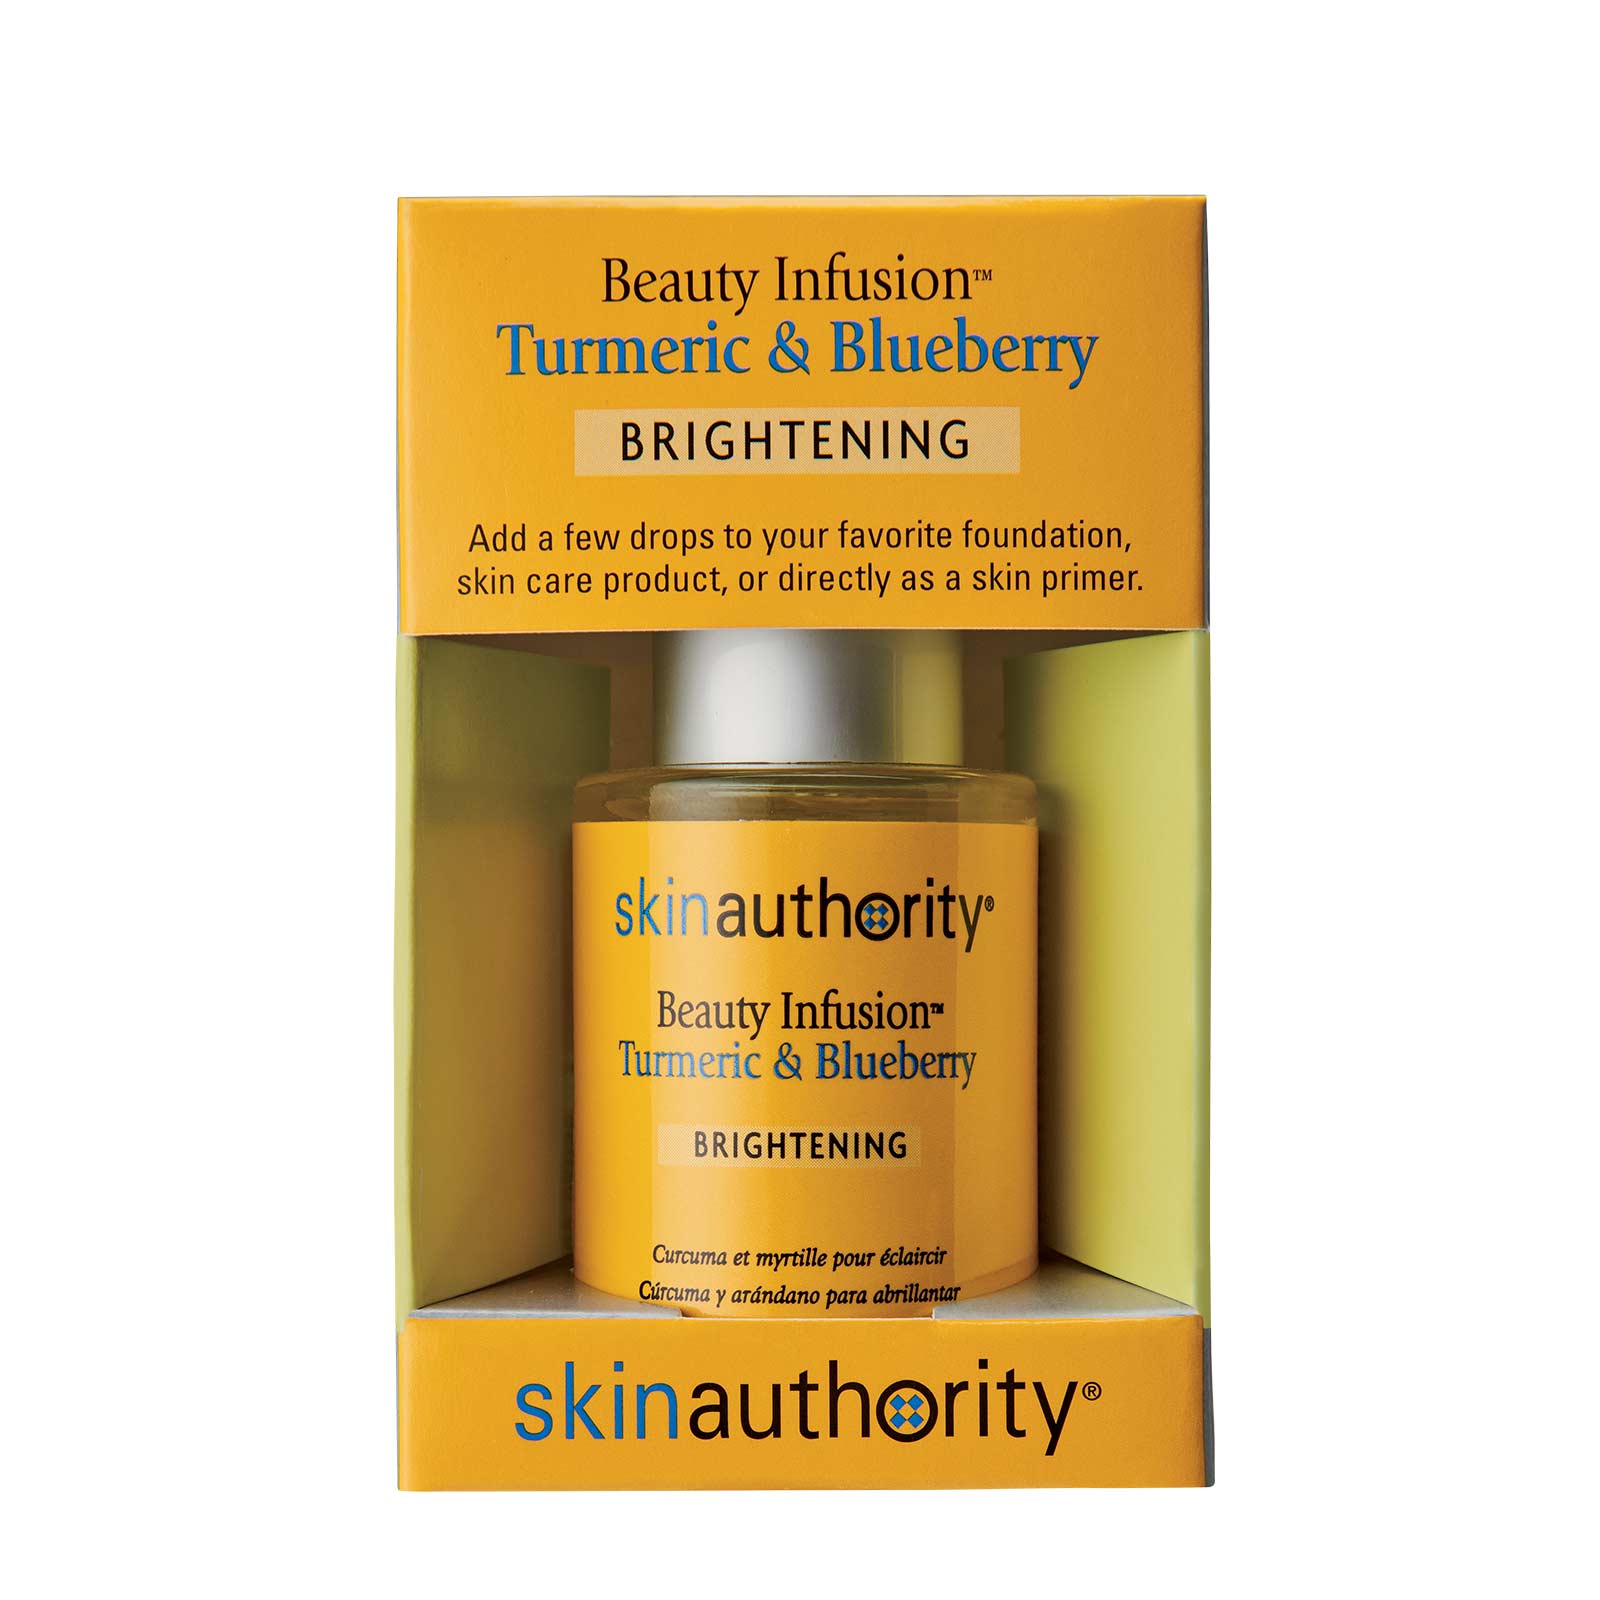 Beauty Infusion Turmeric & Blueberry  for Brightening  by Skin Authority carton image